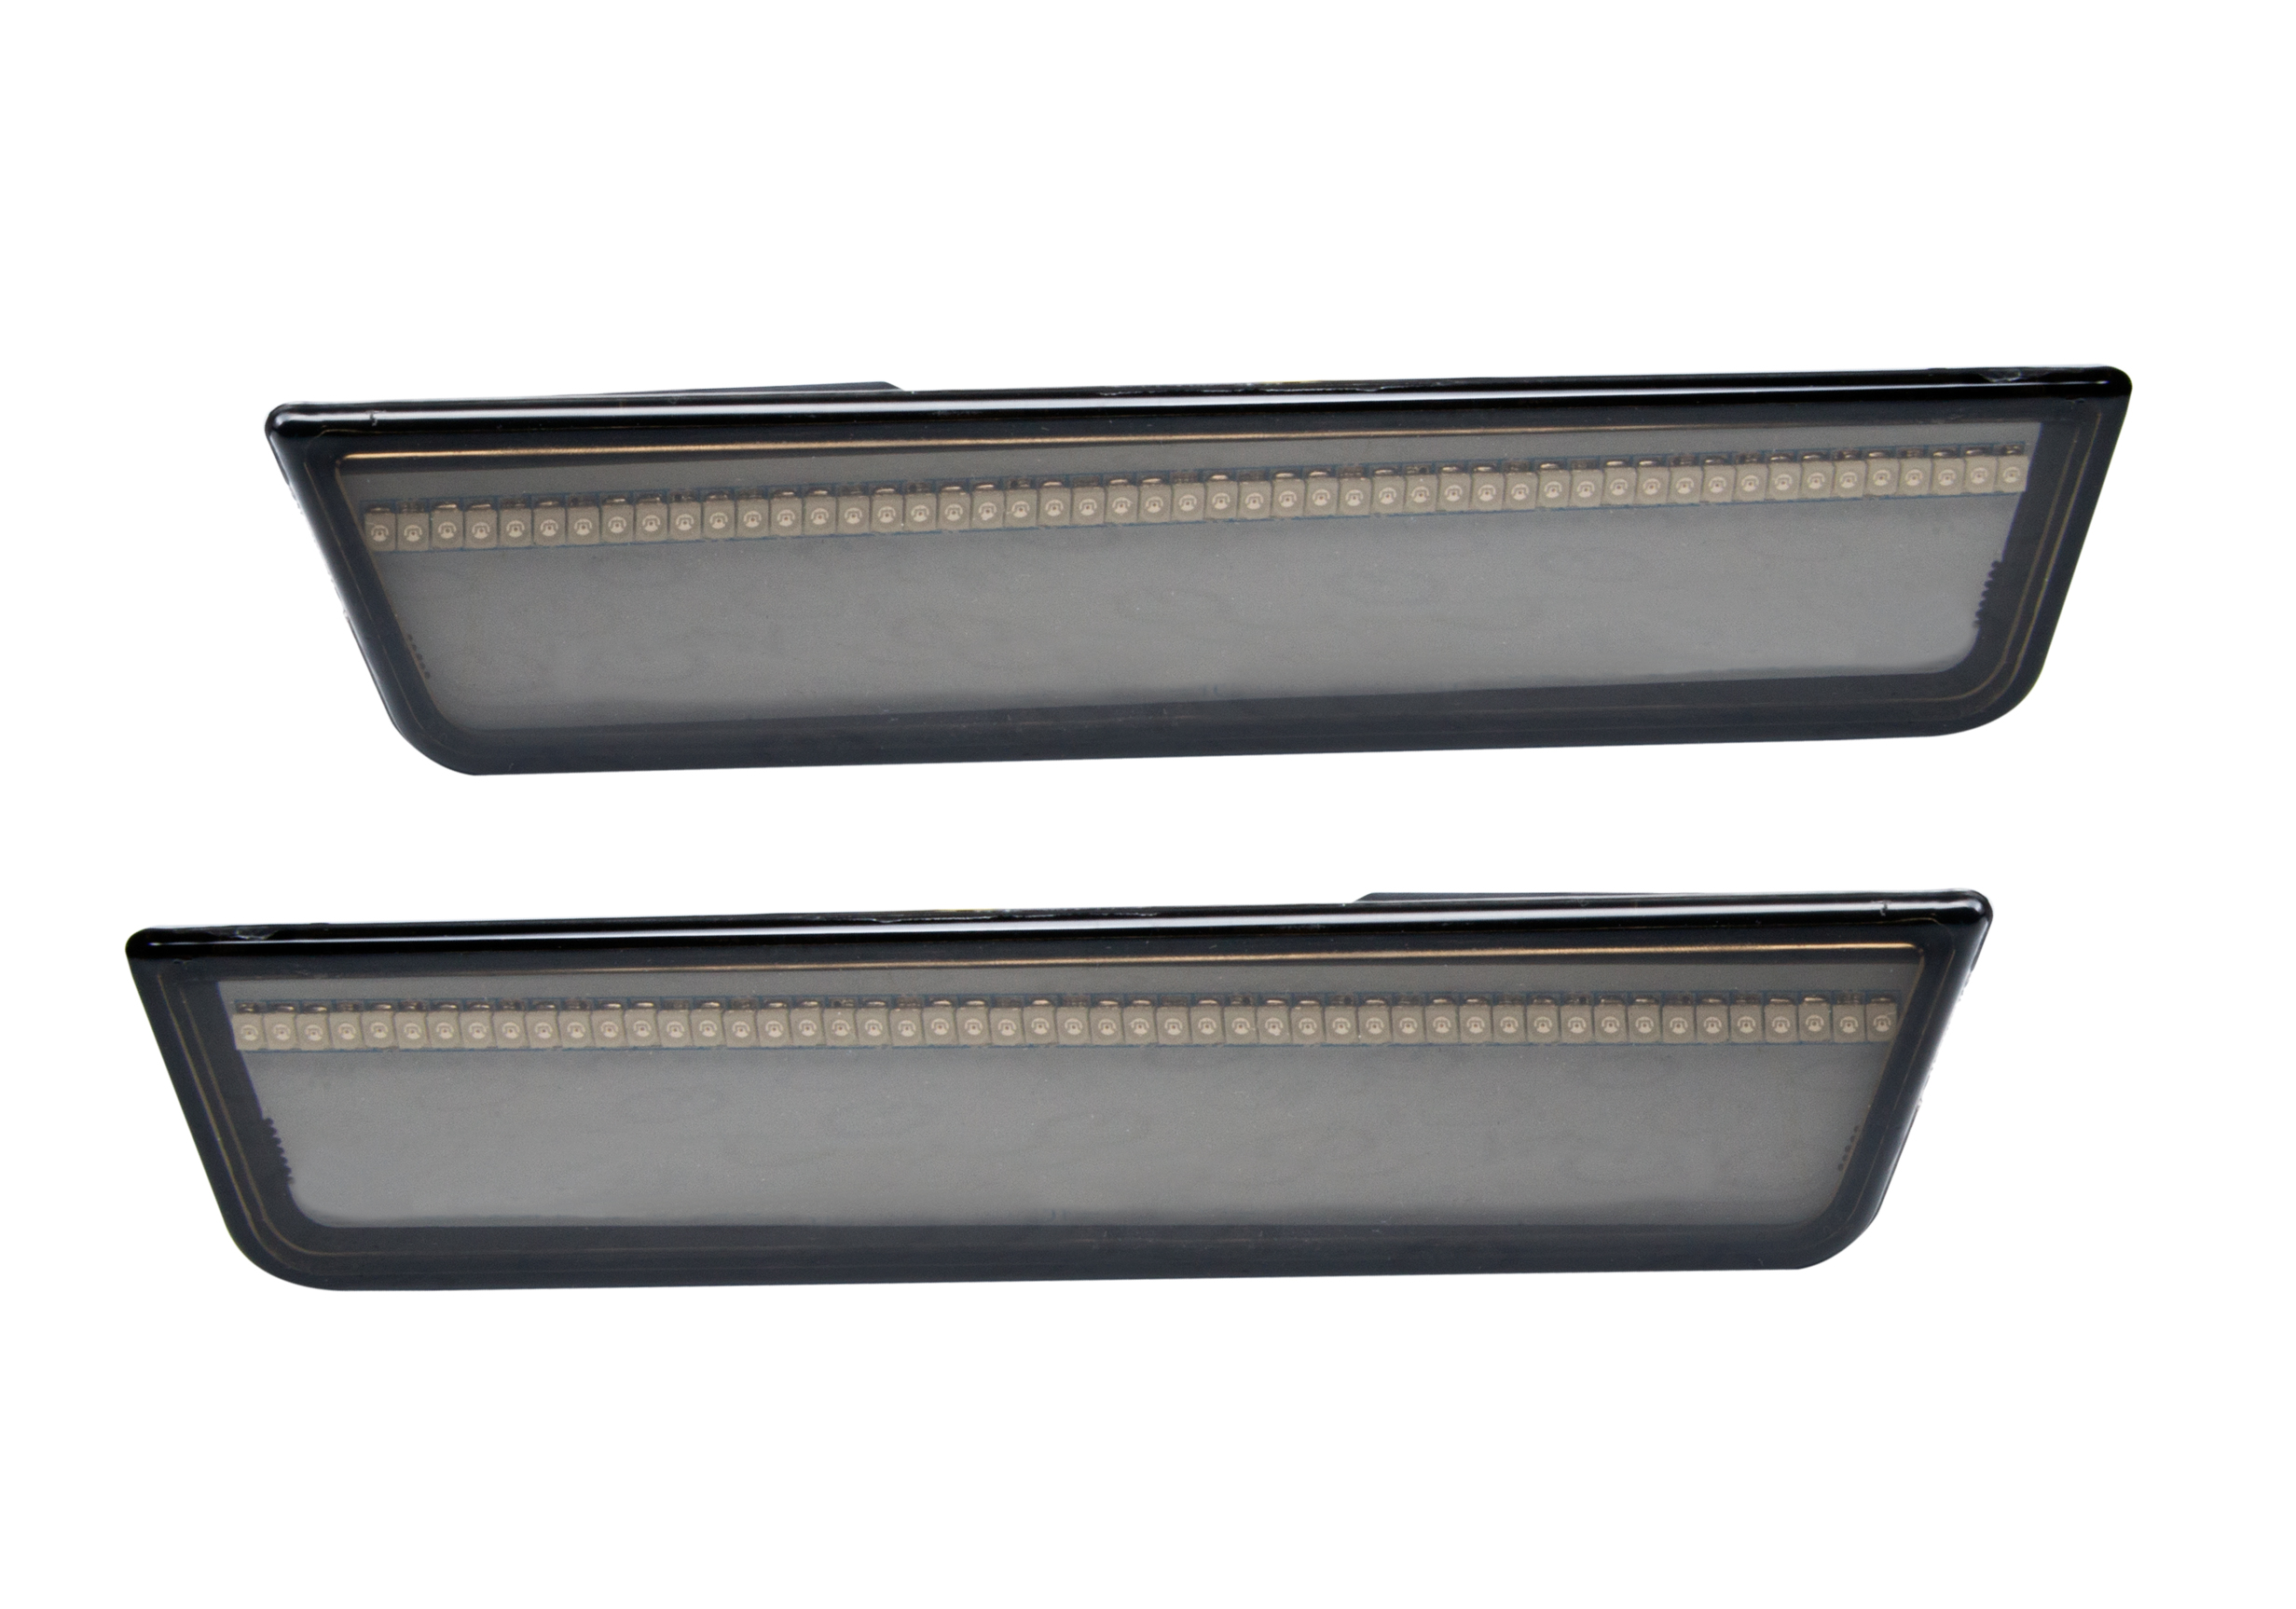 Picture of Oracle Lighting 9834-020 Concept Sidemarker Set, Tinted - No Paint, Rear Set Only